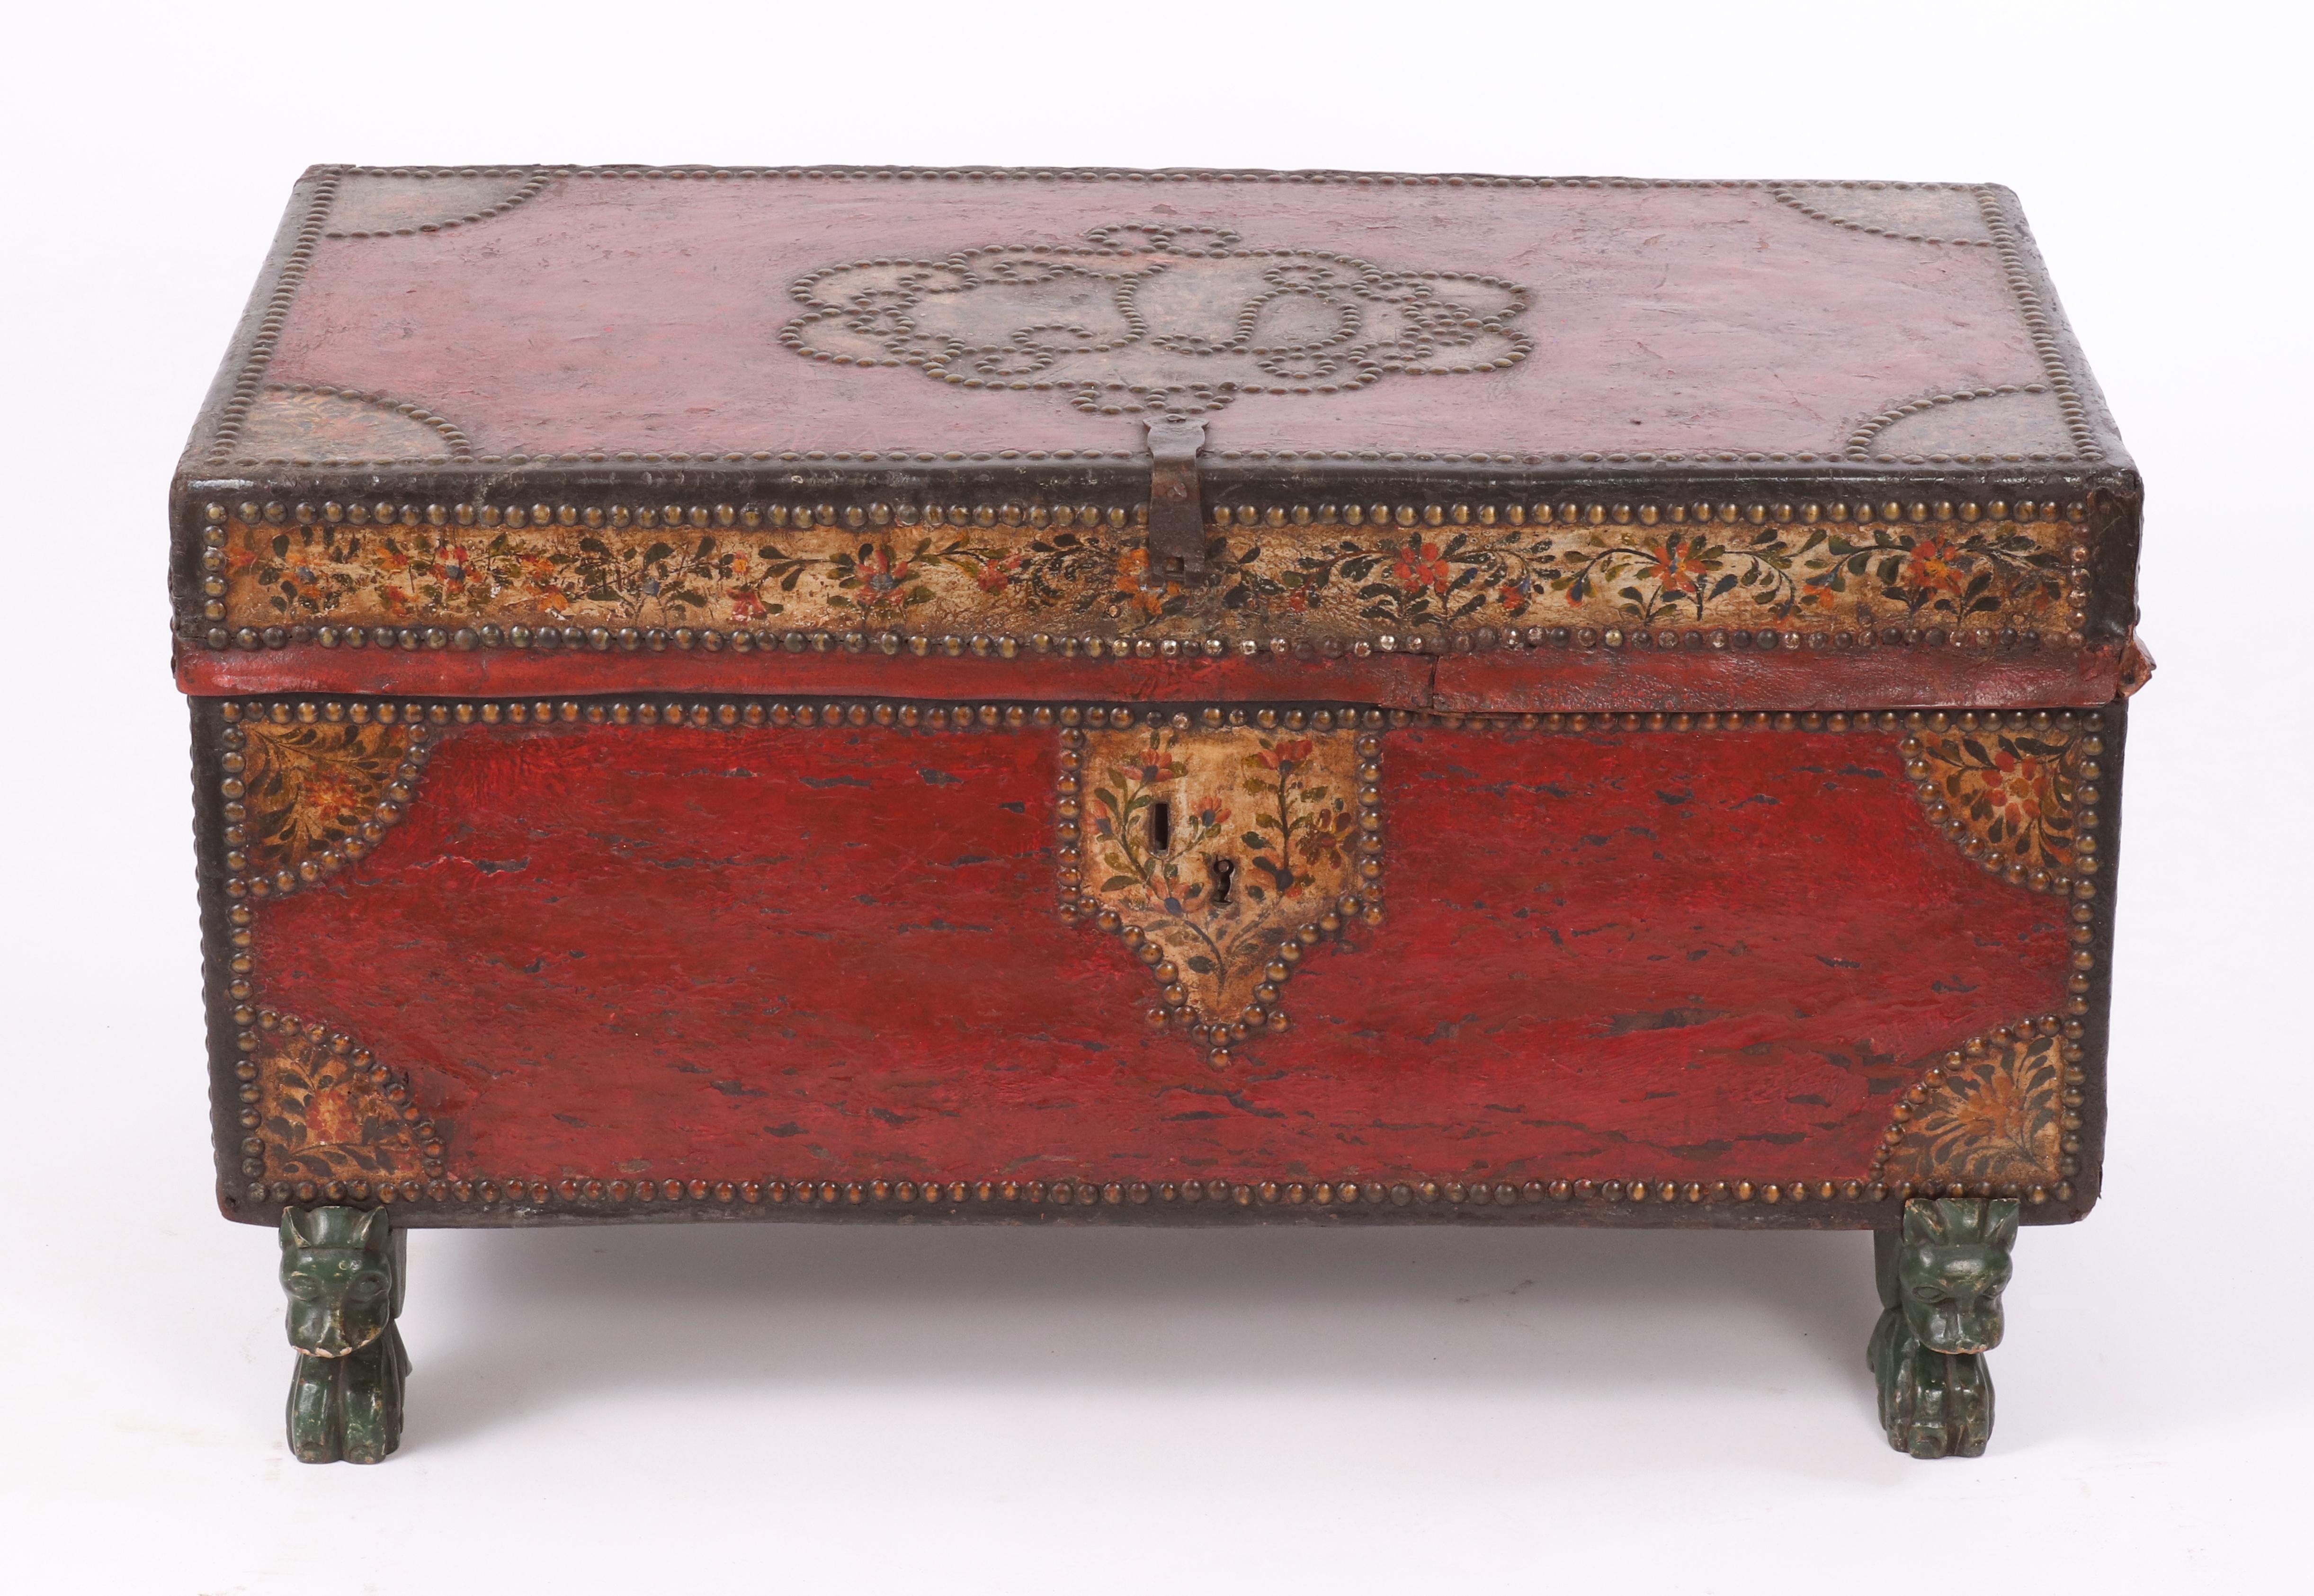 Chinese Export Leather Trunk, circa 1820 In Good Condition For Sale In Saint Louis, MO